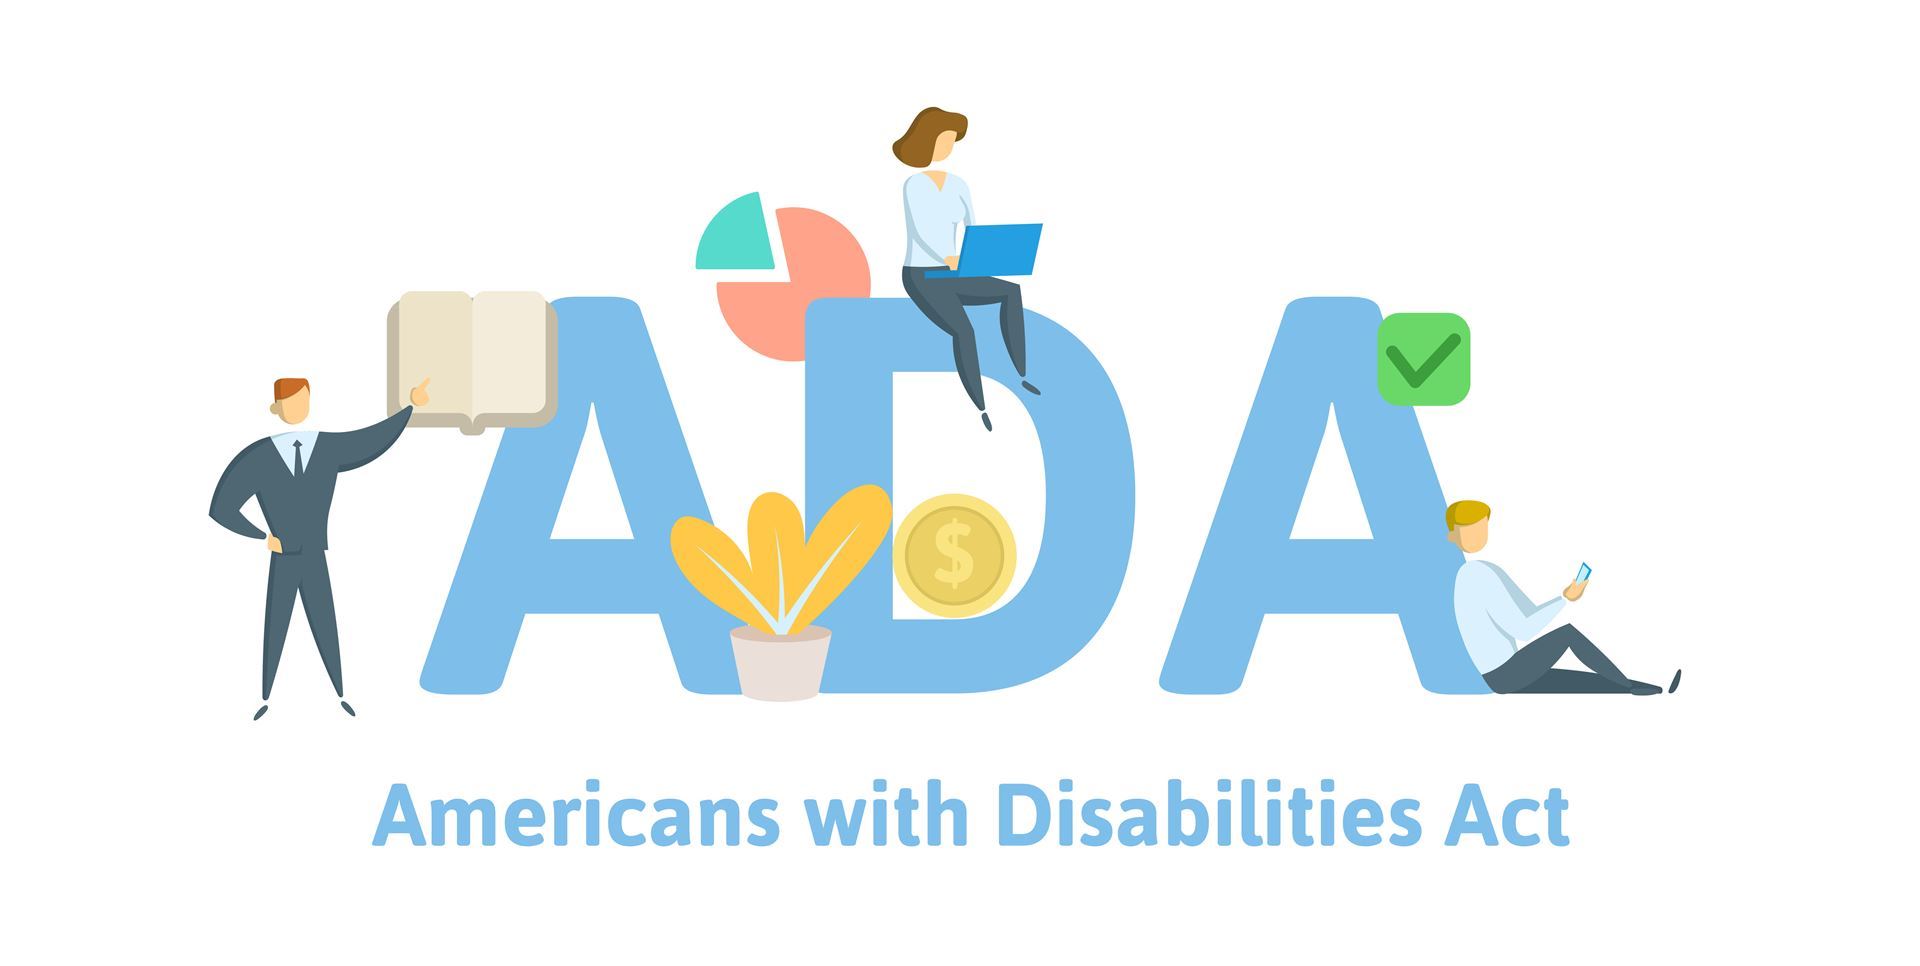 ADA - Americans with Disabilities Act